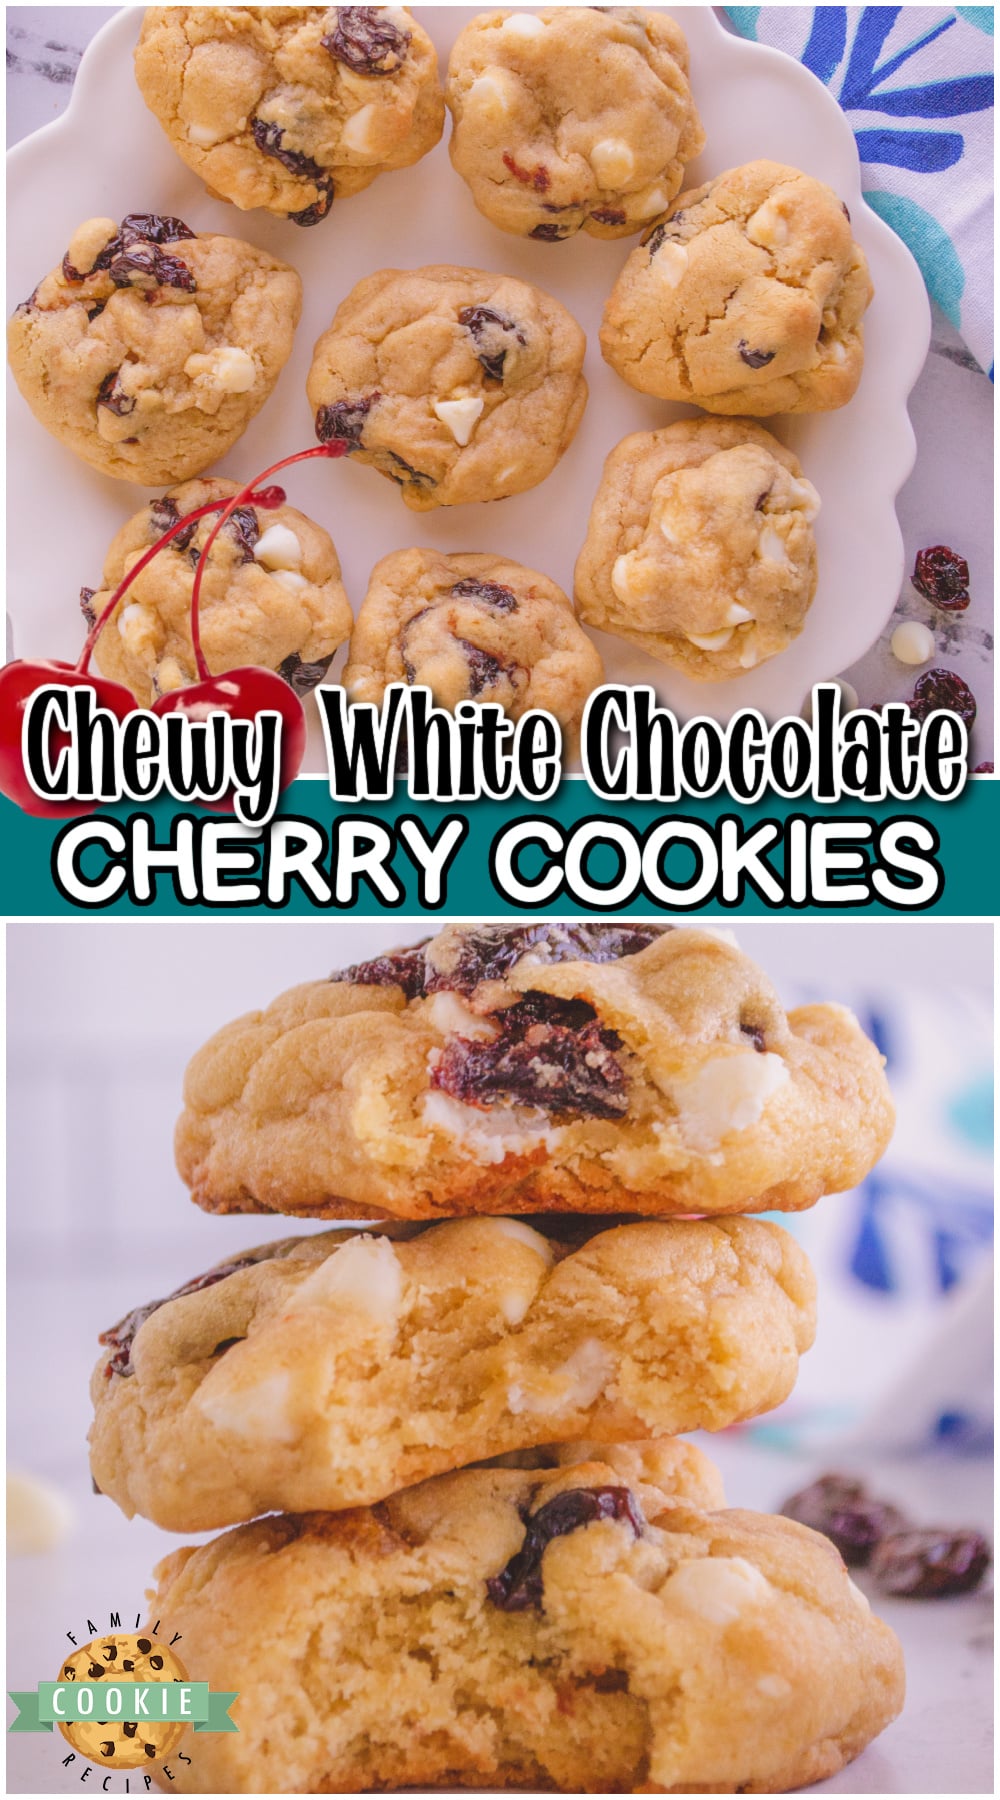 White Chocolate Cherry Cookies are sweet & chewy homemade cookies bursting with bright cherry flavor! Cherry cookies made with white chocolate chips perfect for any time!  via @buttergirls